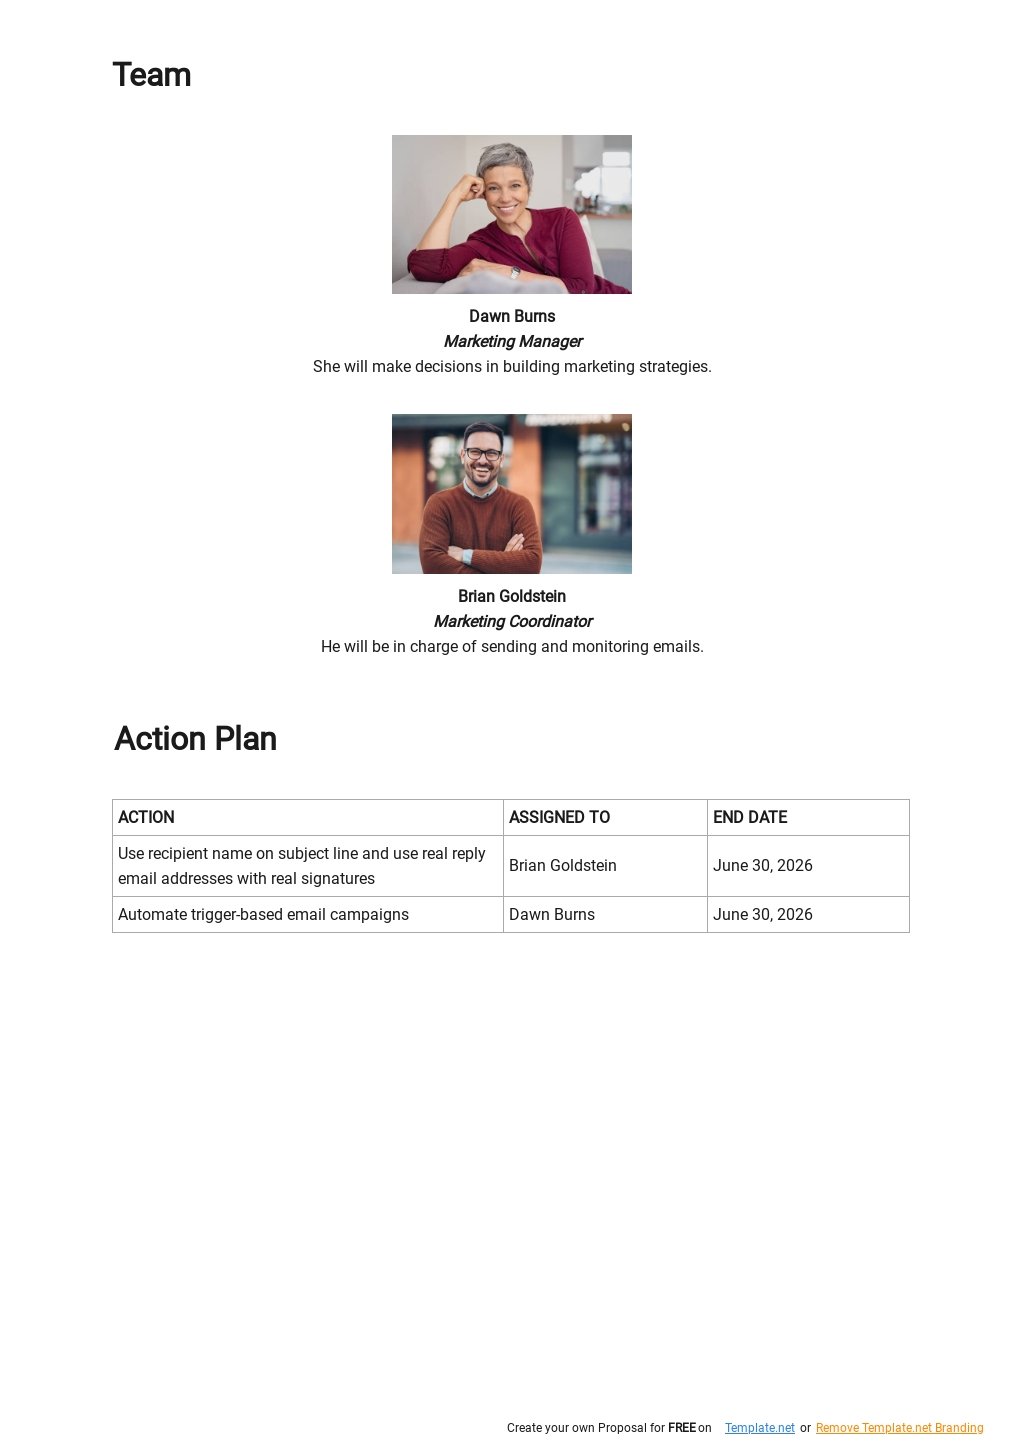 Email Marketing Strategy Plan Template 2.jpe